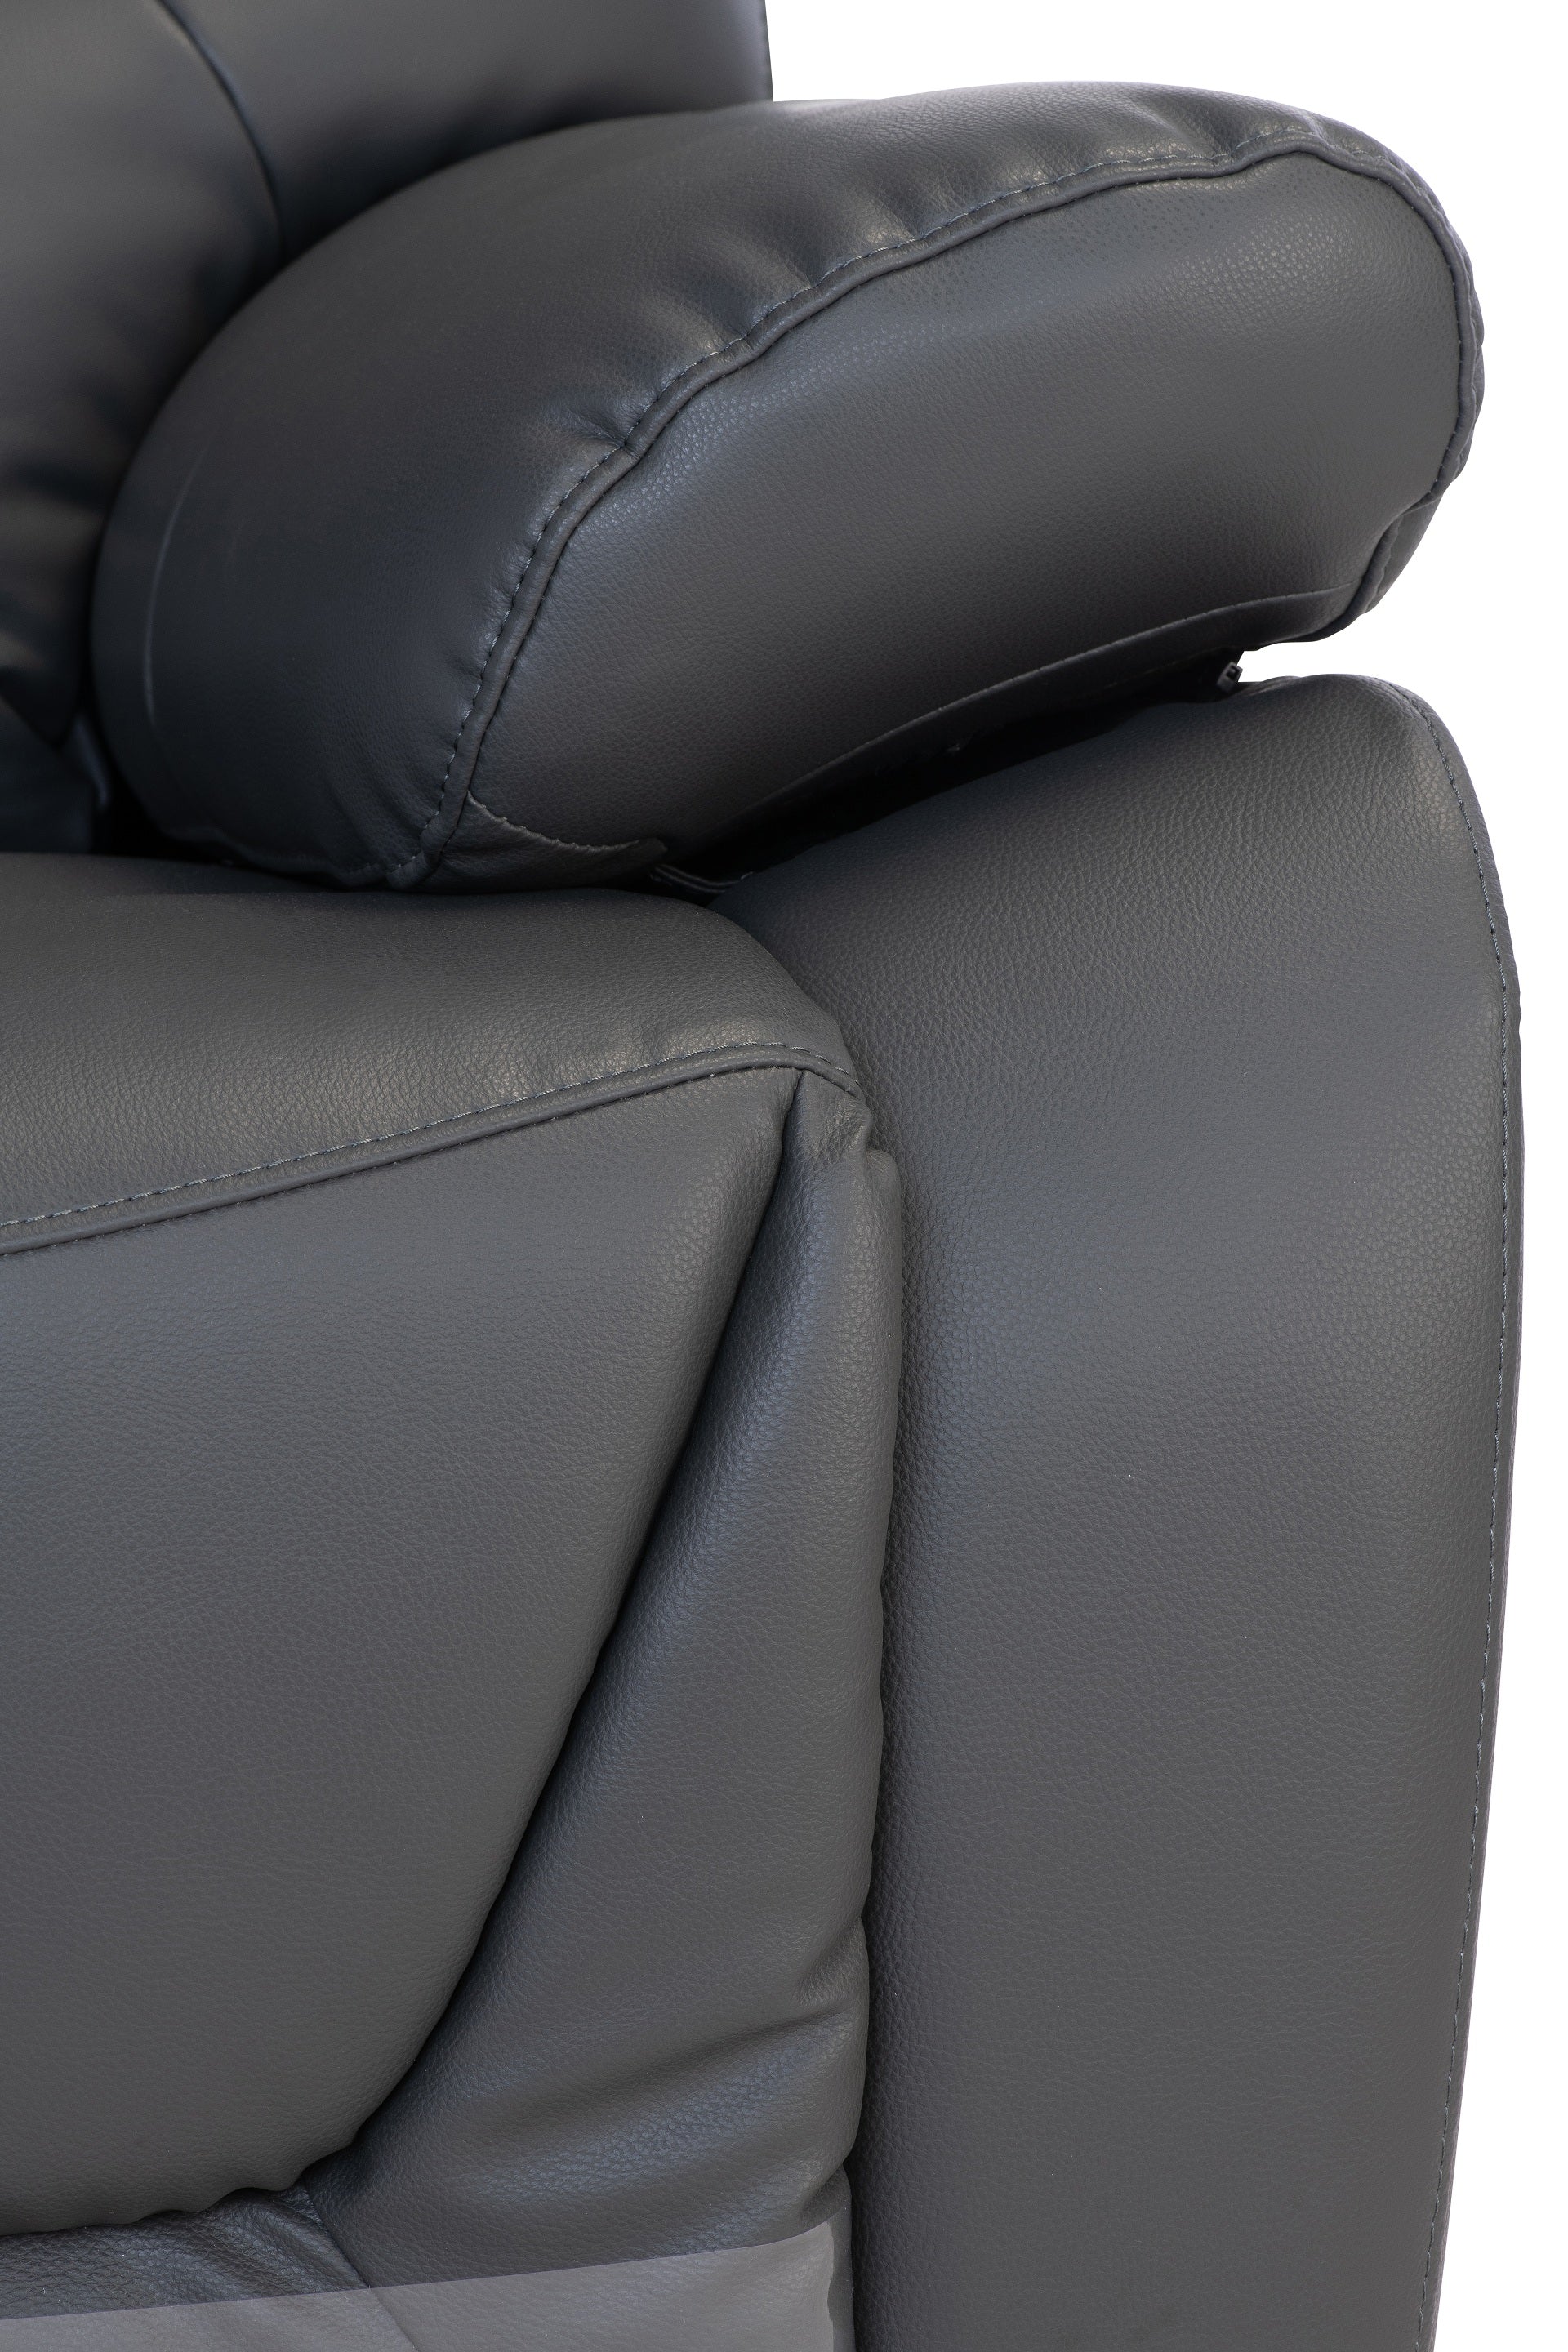 Darah Leather Electric Recliner - Charcoal